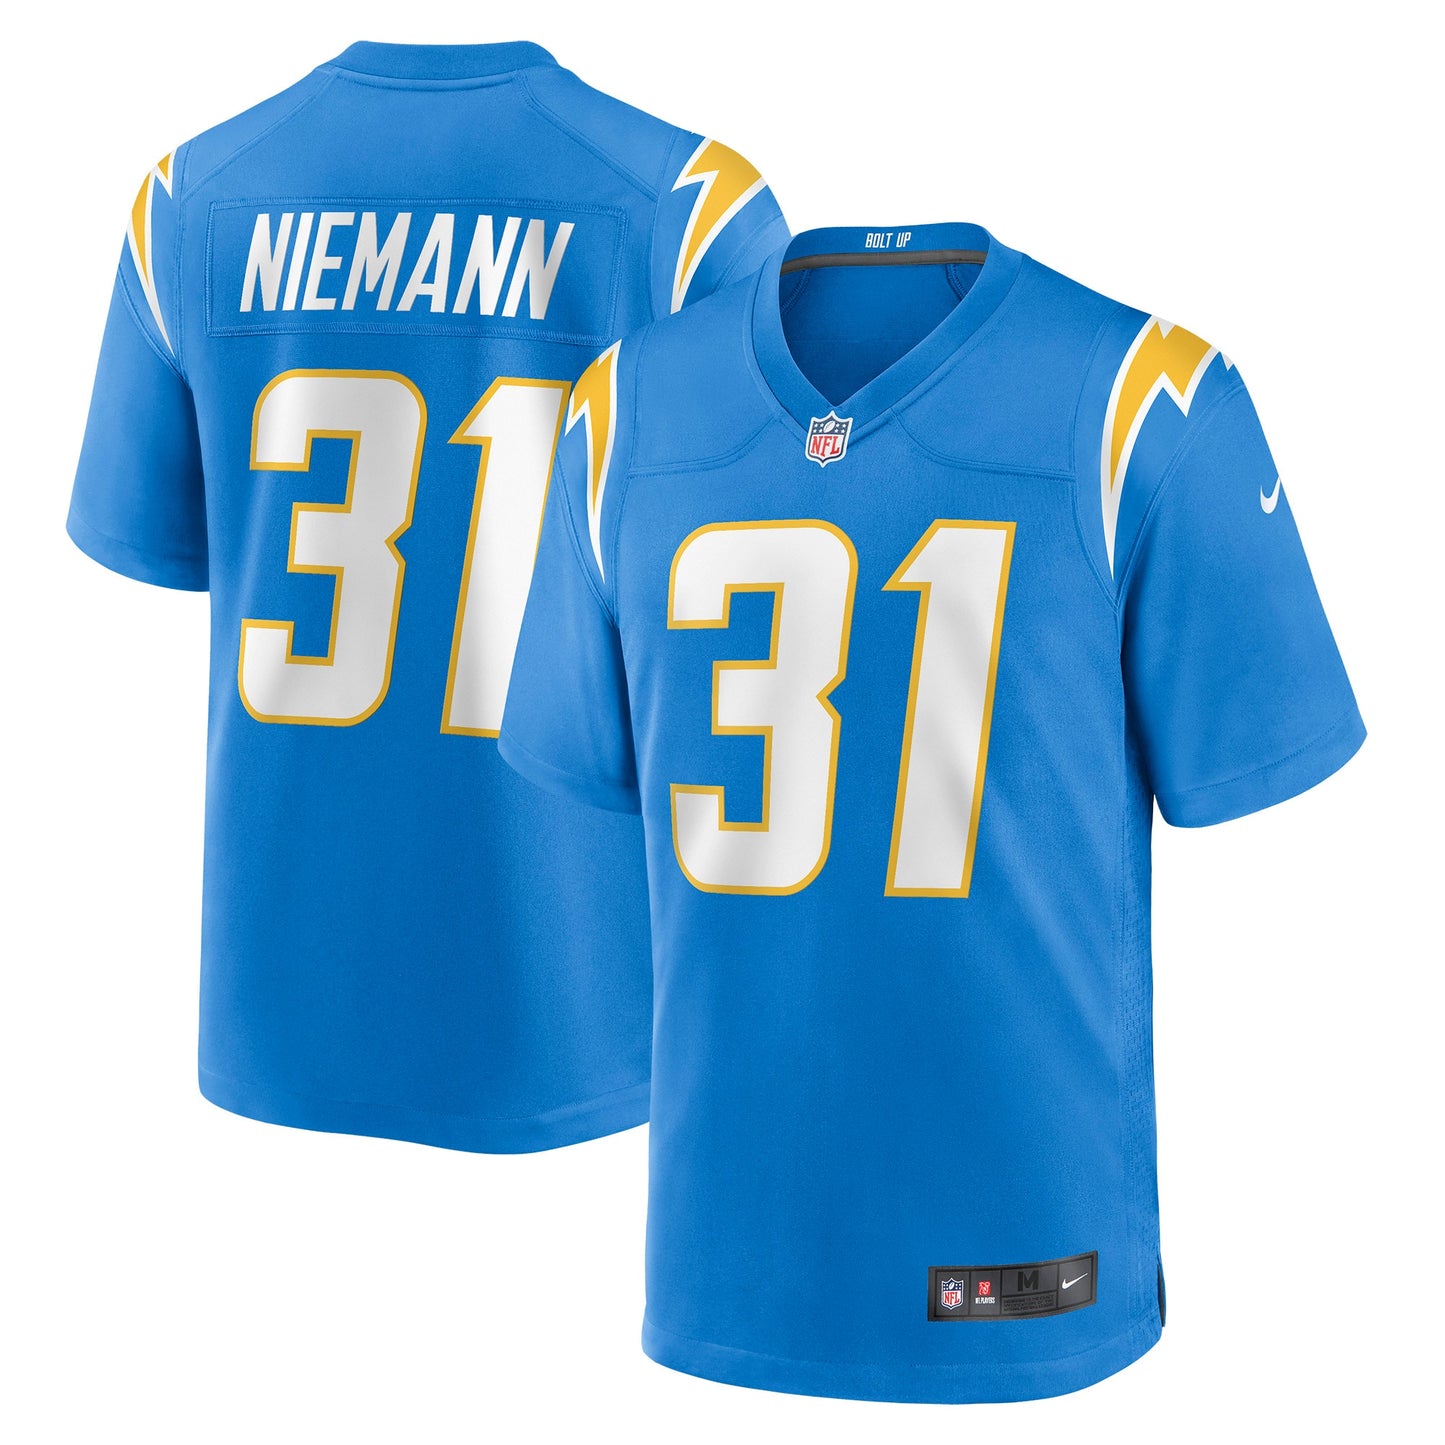 Nick Niemann Los Angeles Chargers Nike Game Player Jersey - Powder Blue